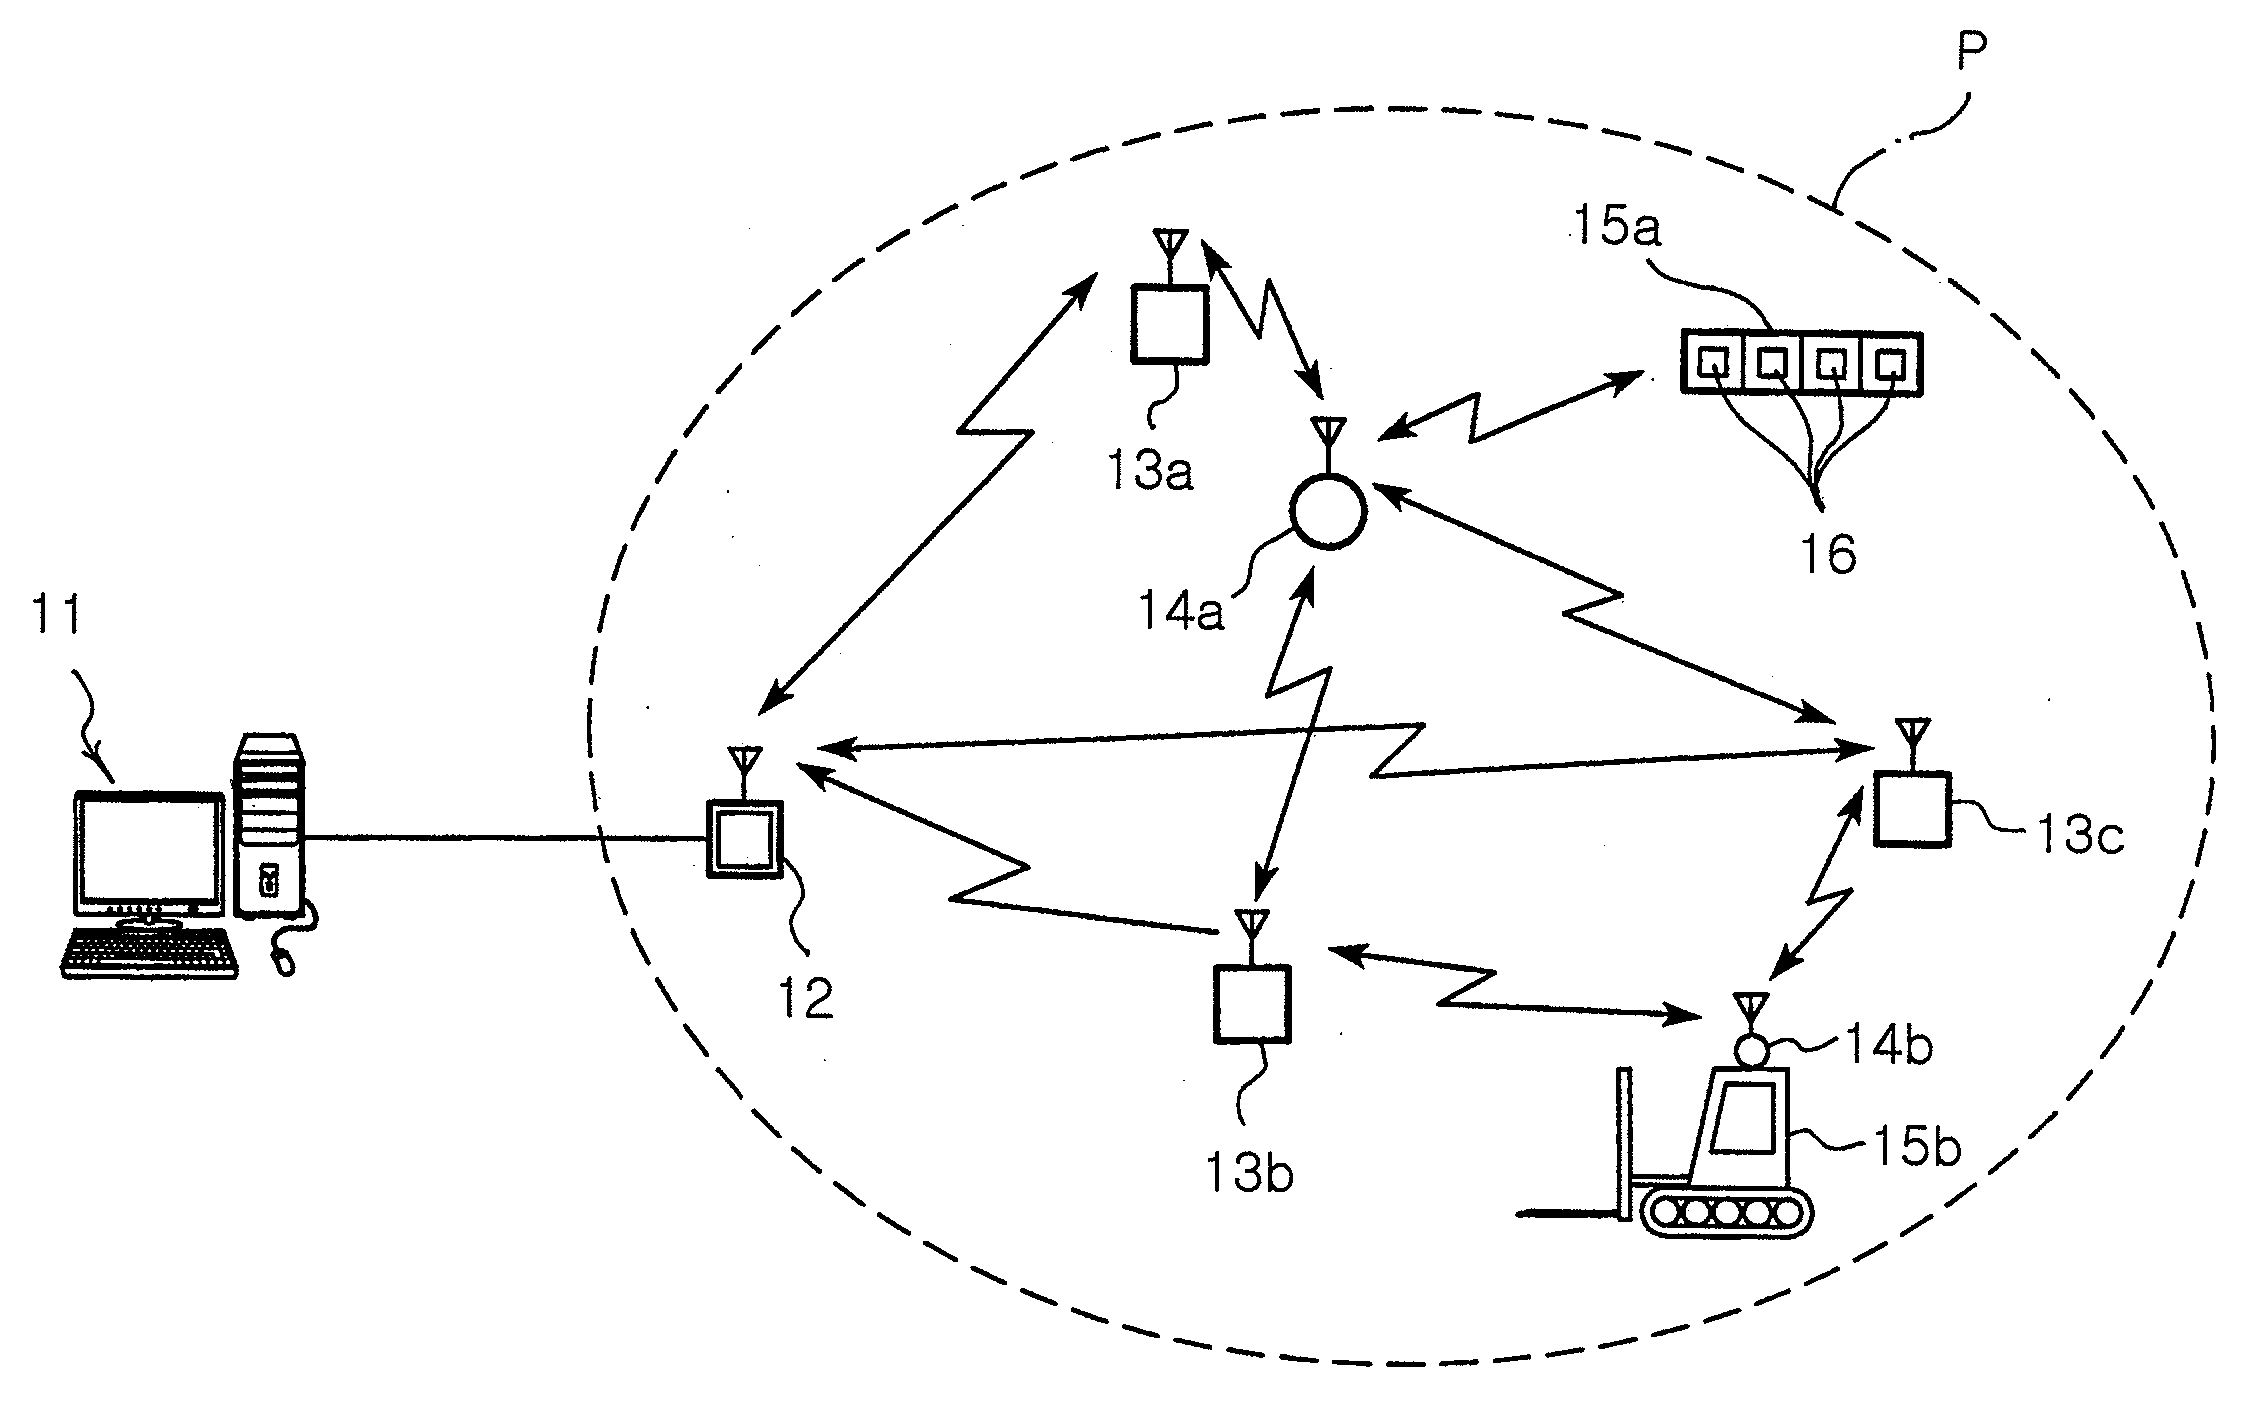 Location awareness system using RFID and wireless connectivity apparatus for location awareness system used therein